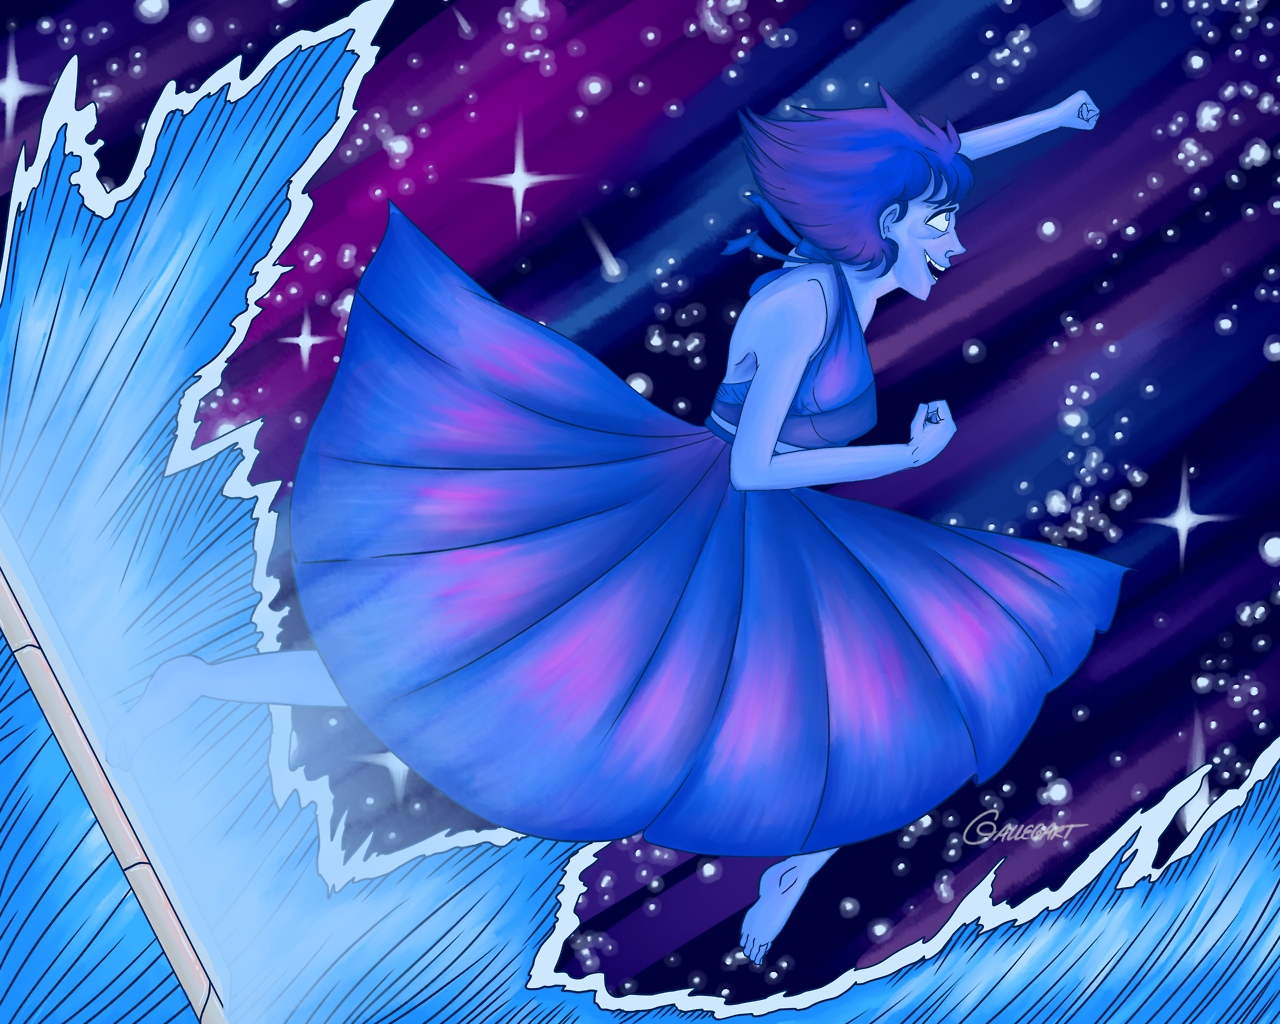 A Lapis Lazuli I made for a friend at uni! The background is probably my favorite part of the whole thing. I feel ashamed of the waves and mirror tbh